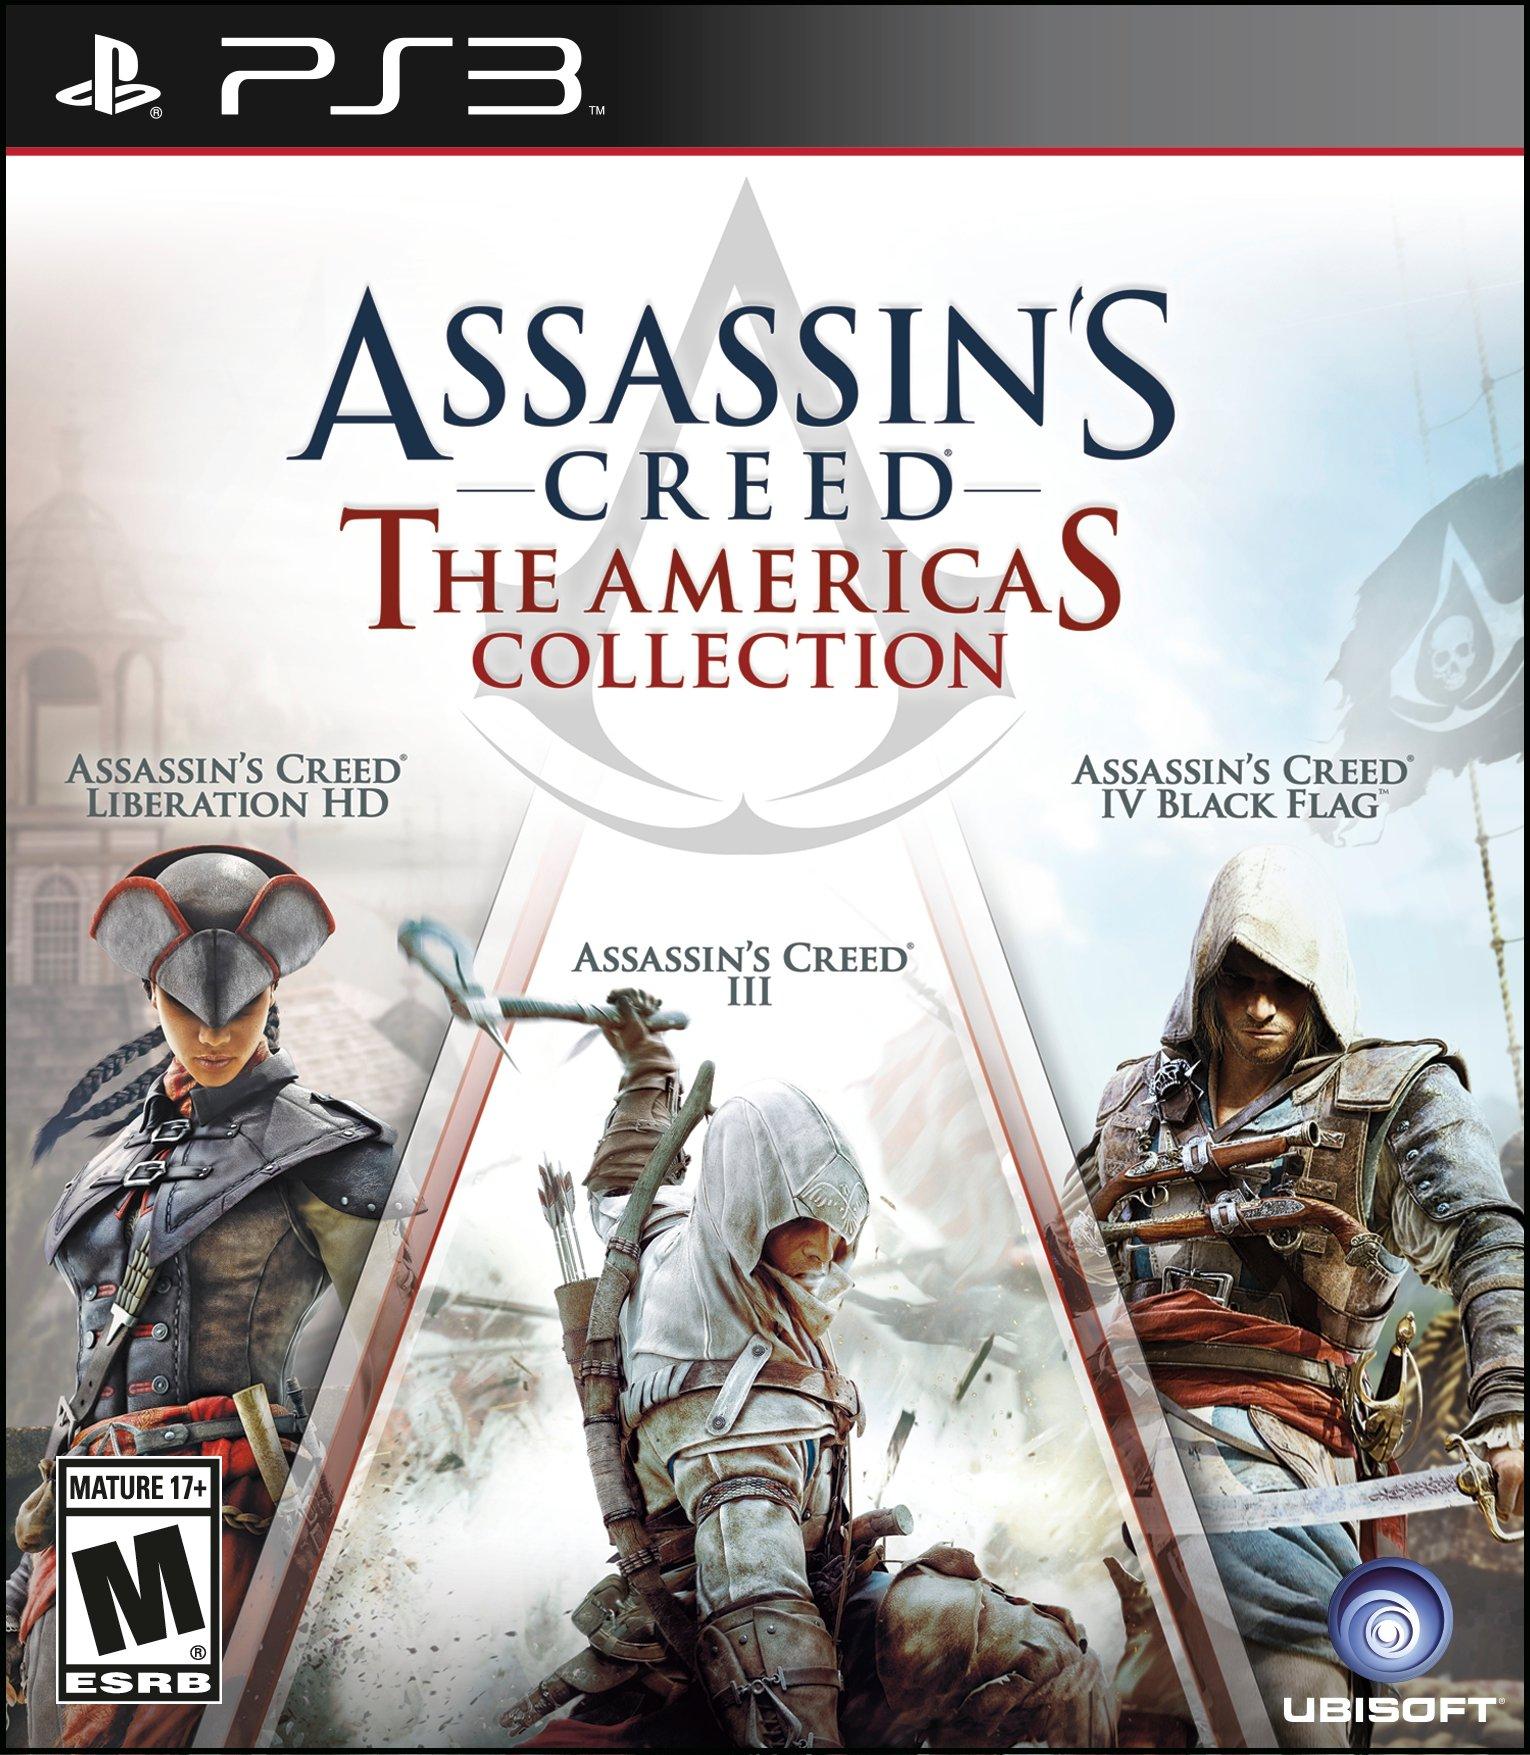 Assassin's Creed: The Americas Collection - PlayStation 3